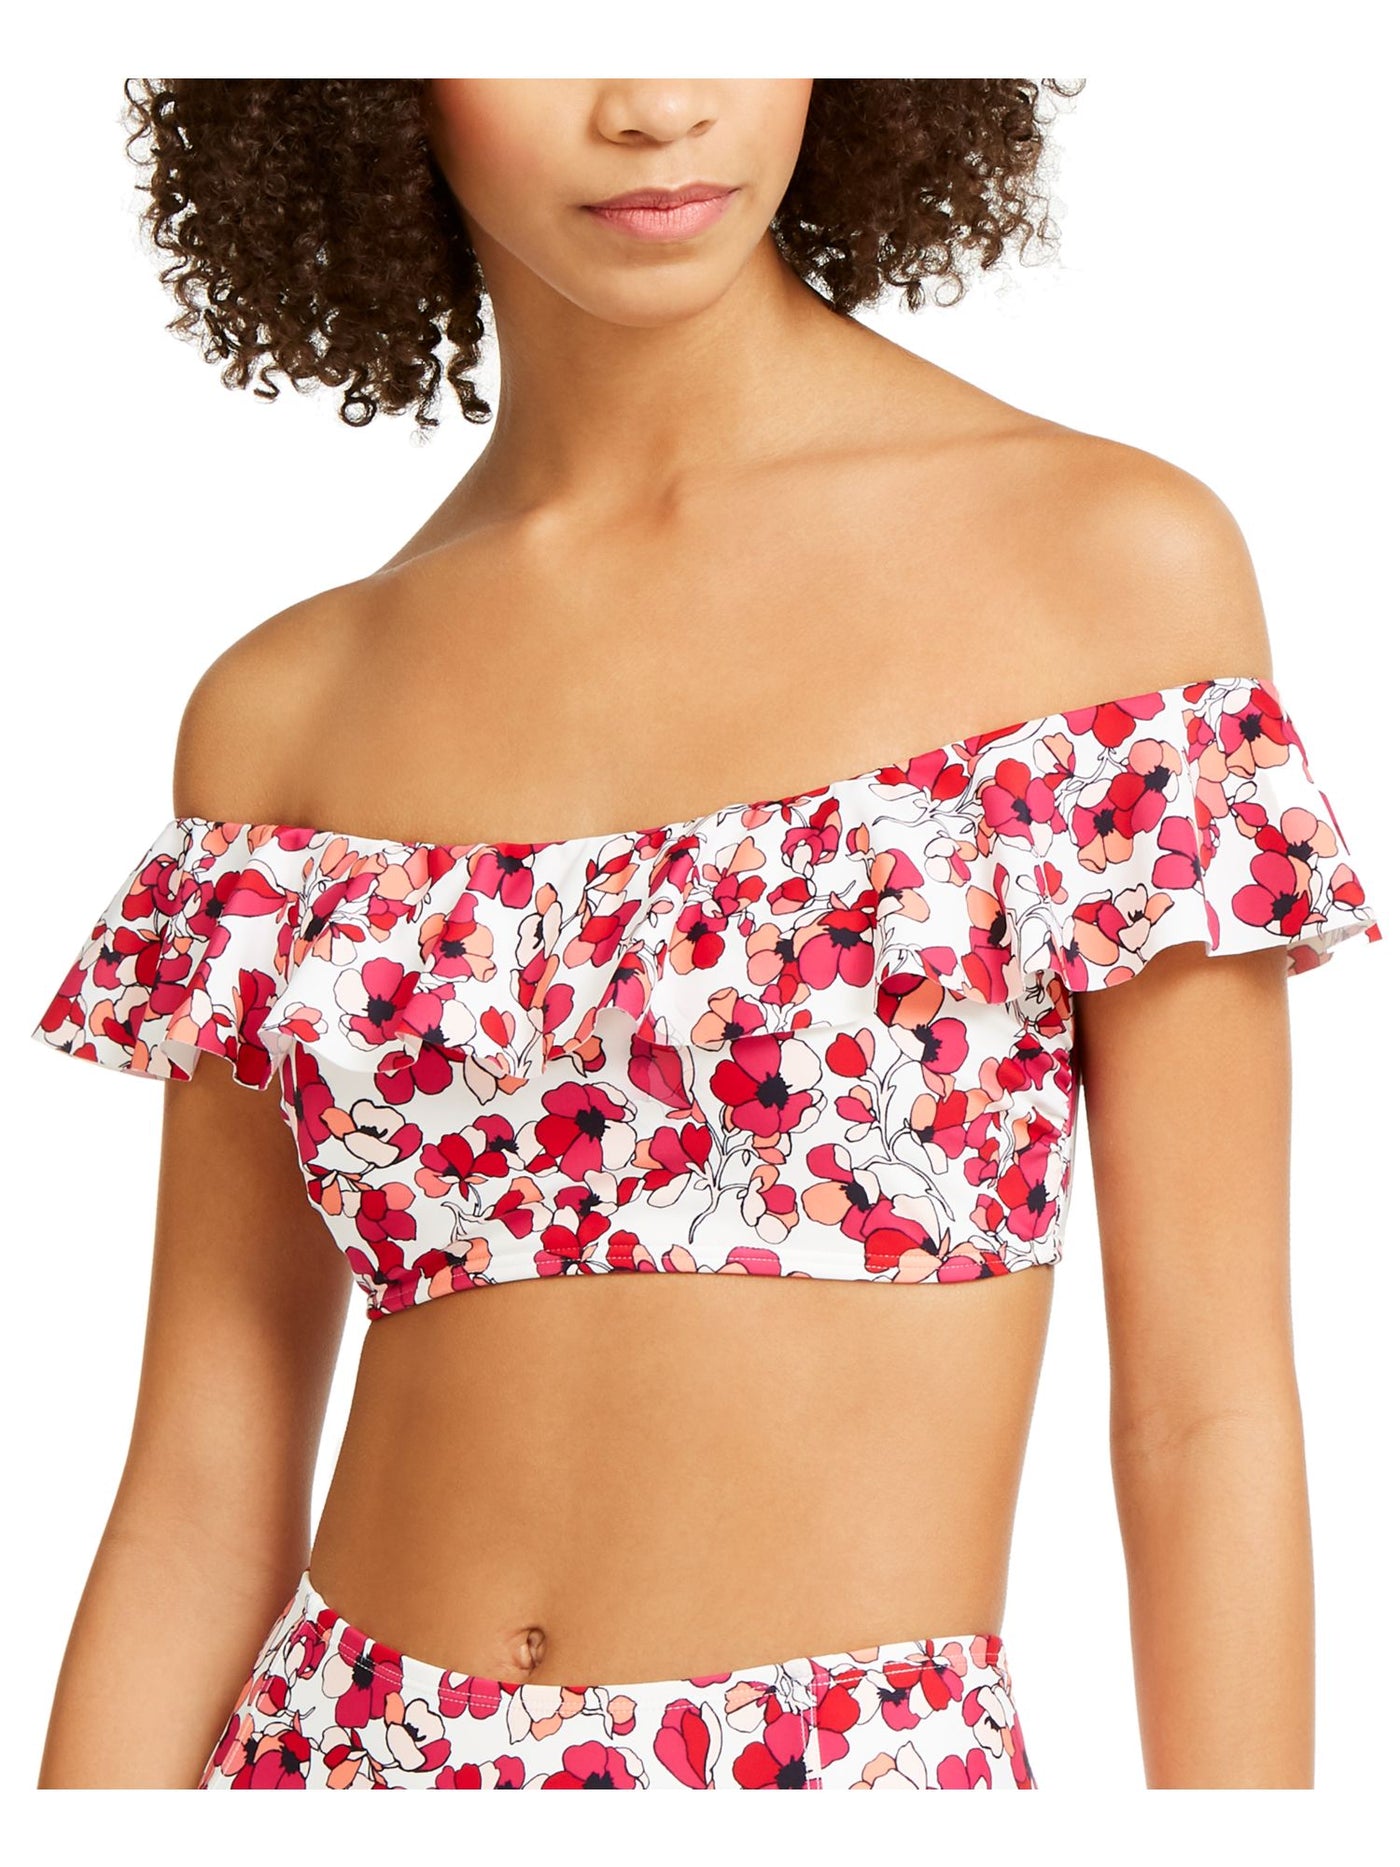 TOMMY HILFIGER Women's Pink Printed Stretch Ruffled UV Protection Off The Shoulder Swimsuit Top XS